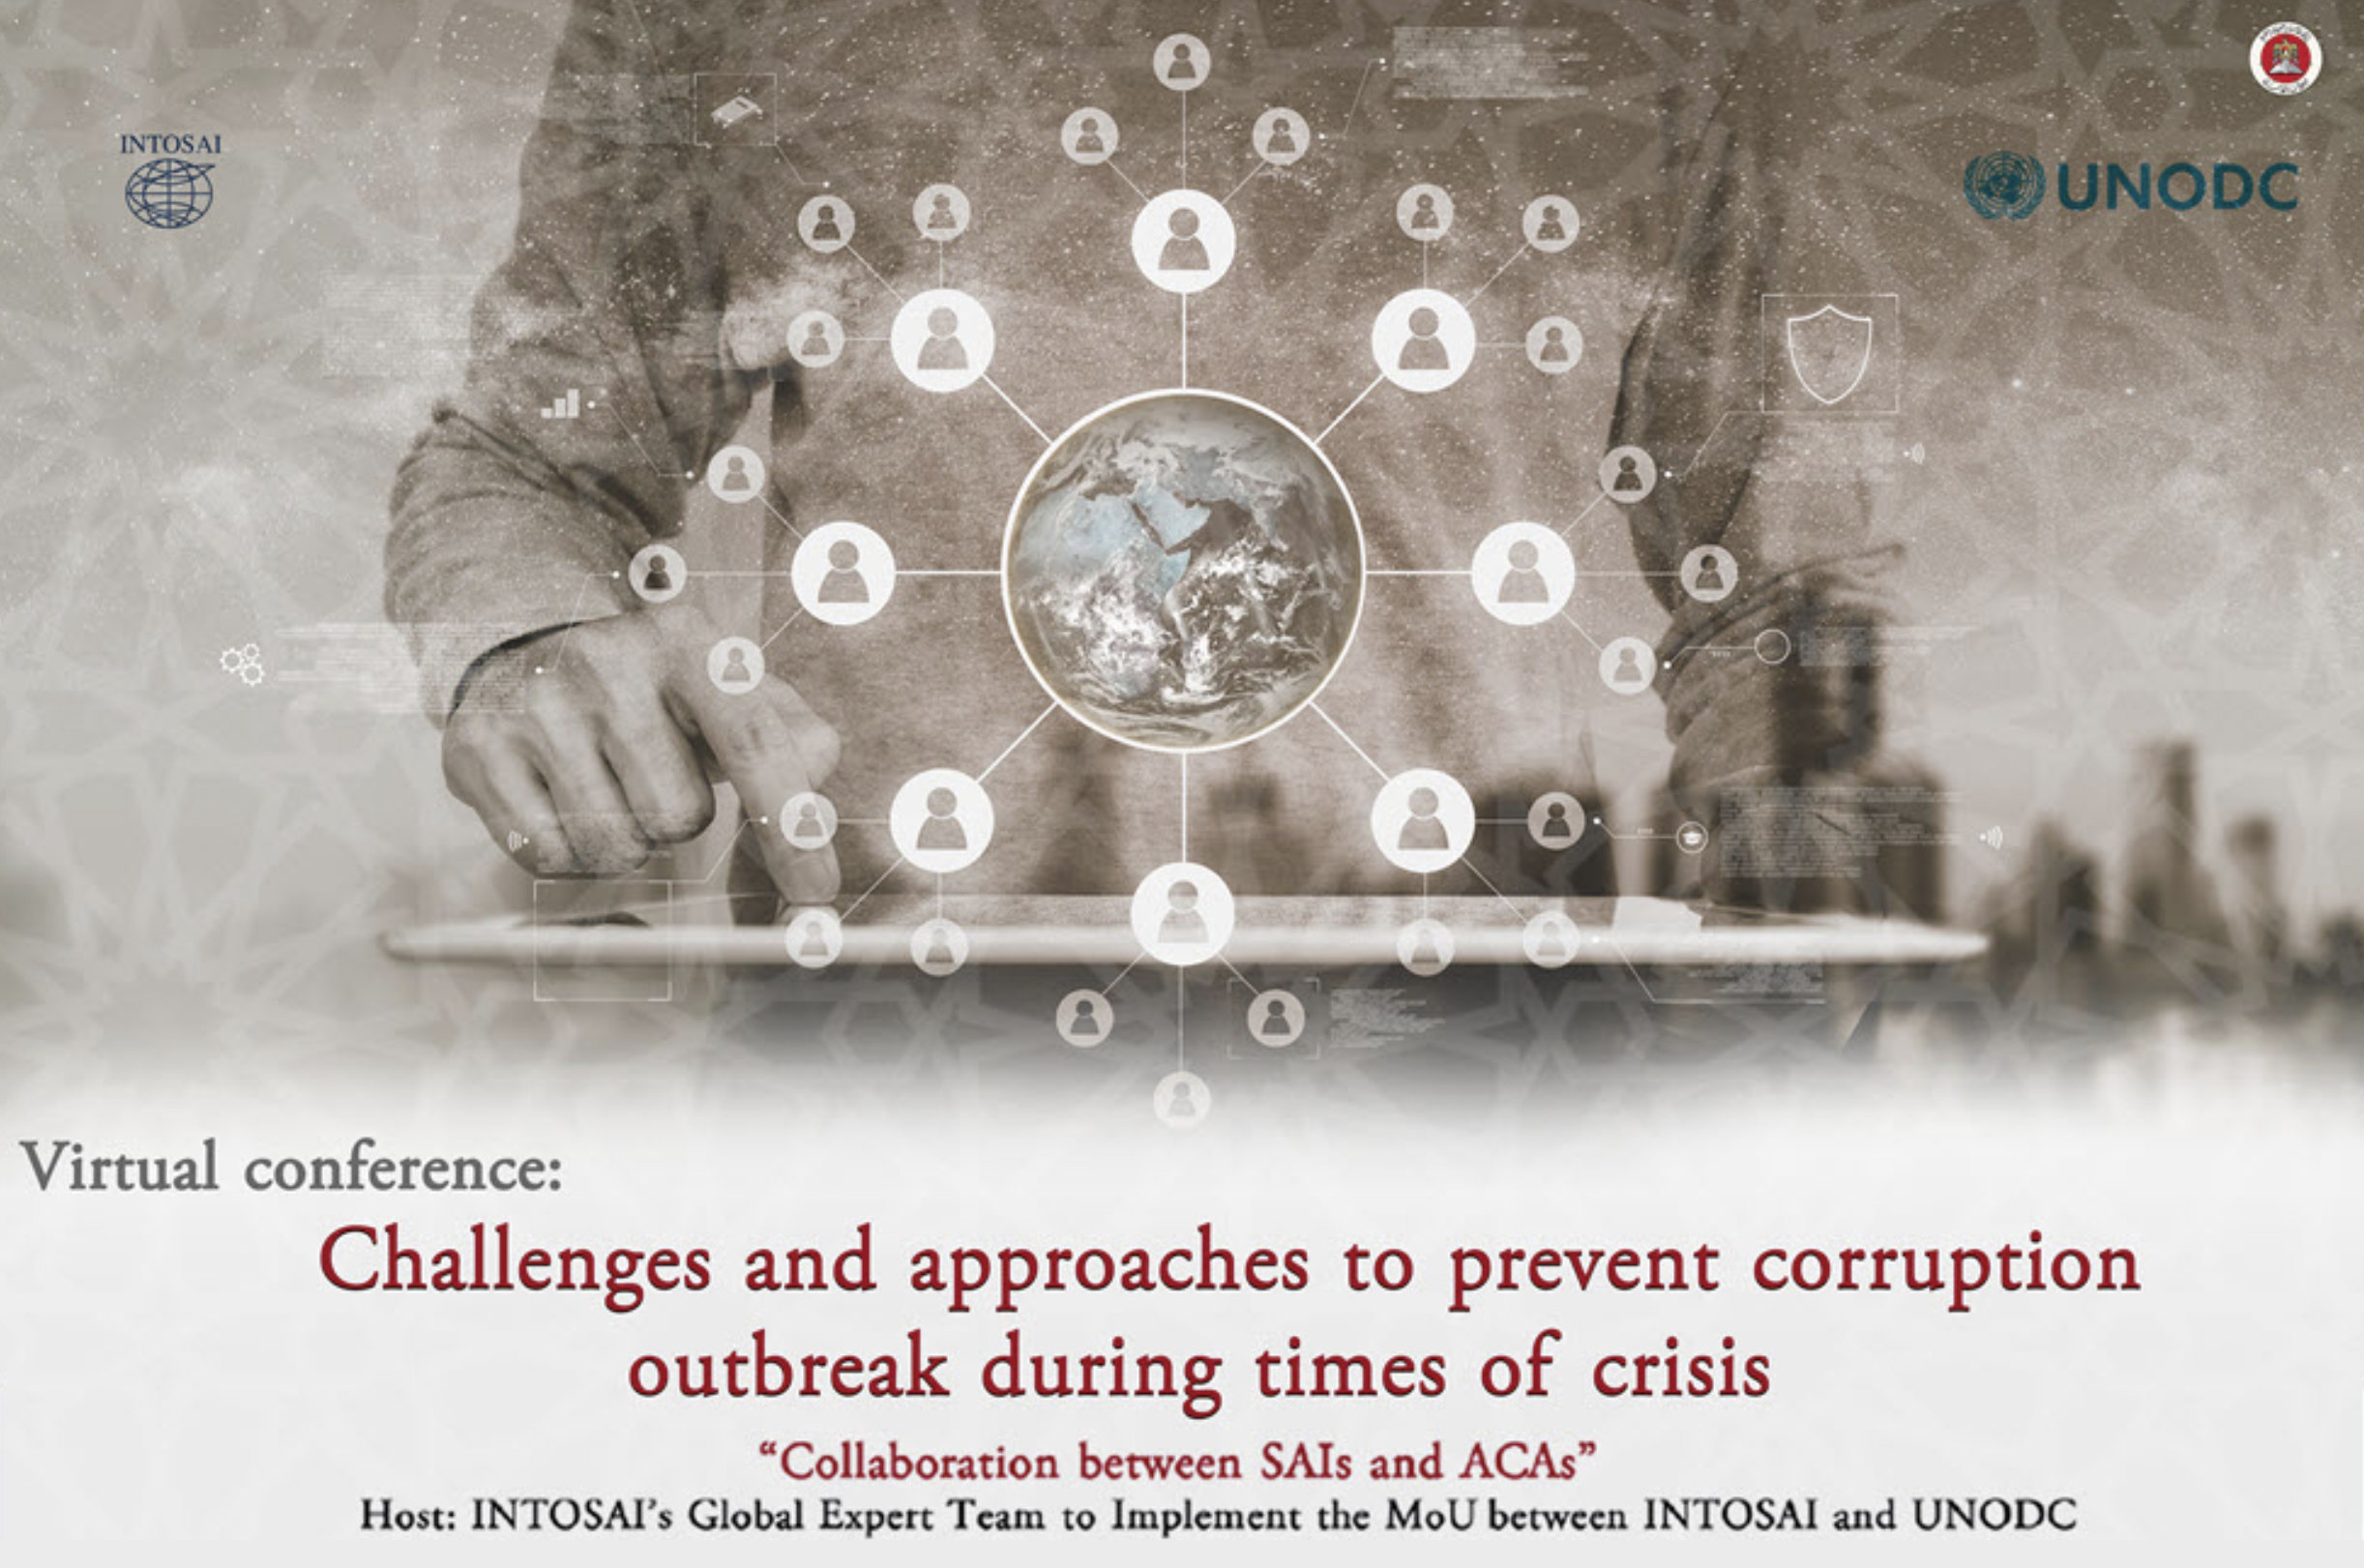 SAI UAE held virtual INTOSAI conference on corruption prevention during times of crisis